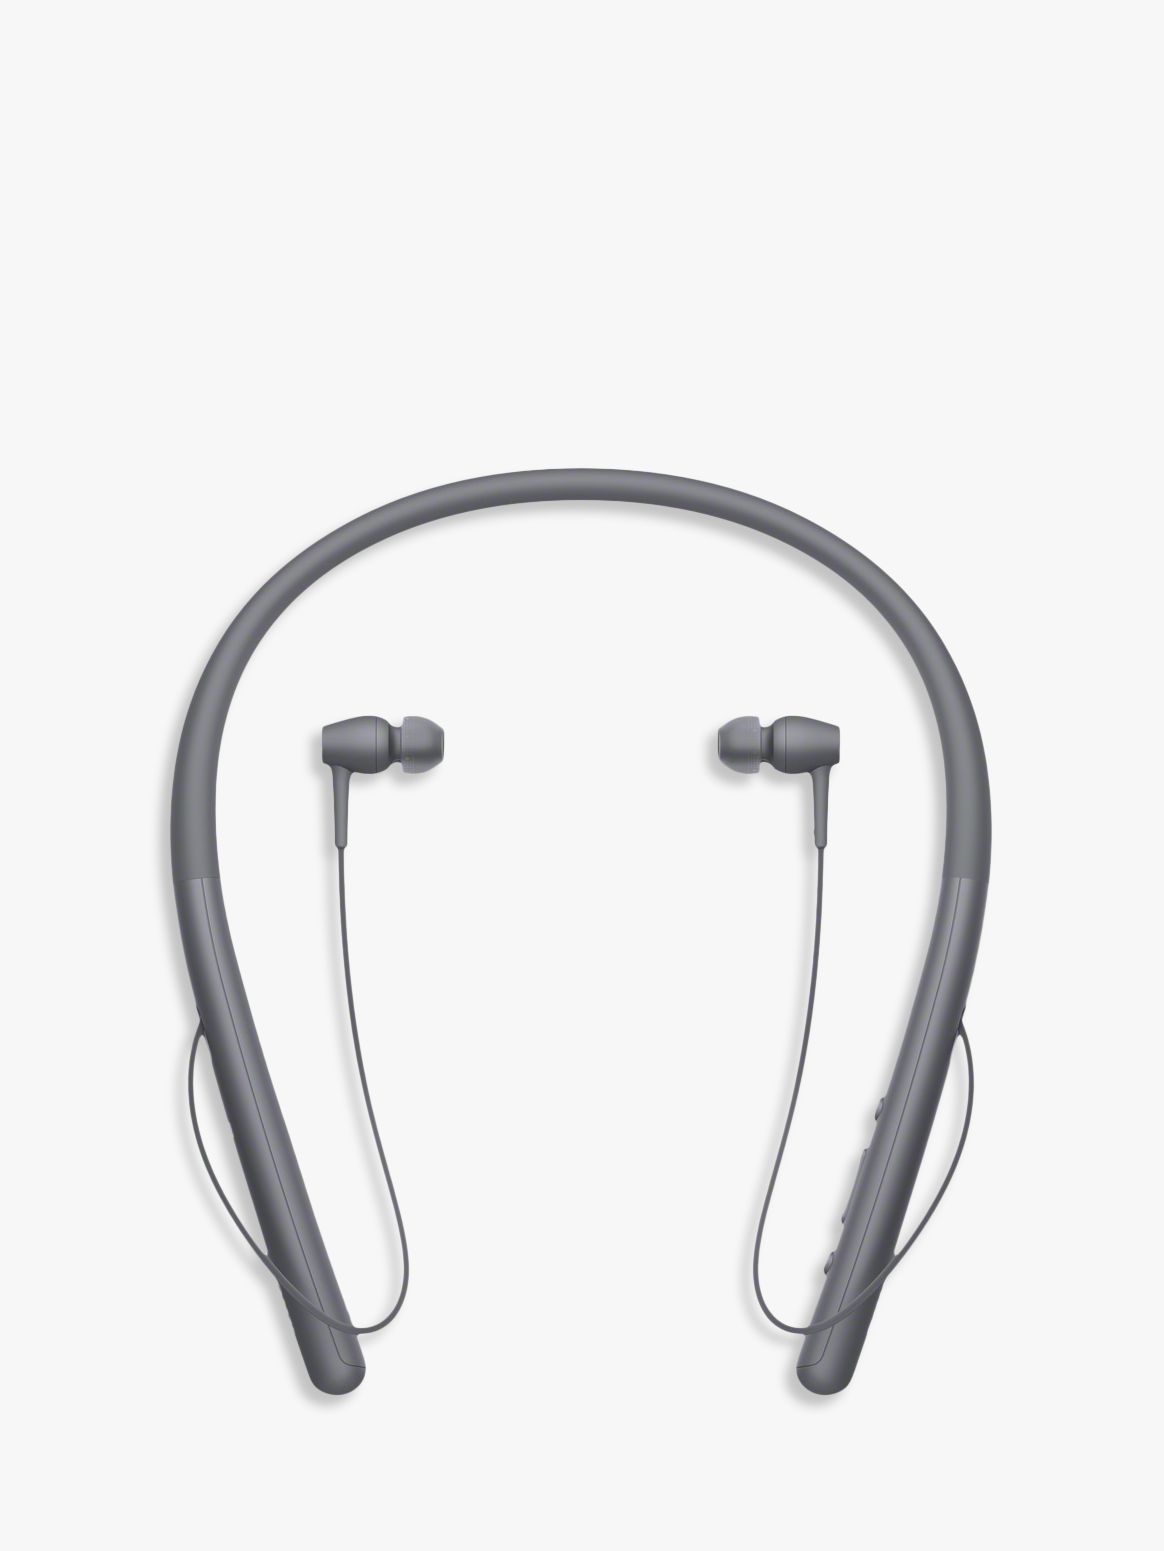 Sony WI-H700 h.ear in 2 Wireless Bluetooth High Resolution In-Ear Headphones with NFC One-Touch & Neckband